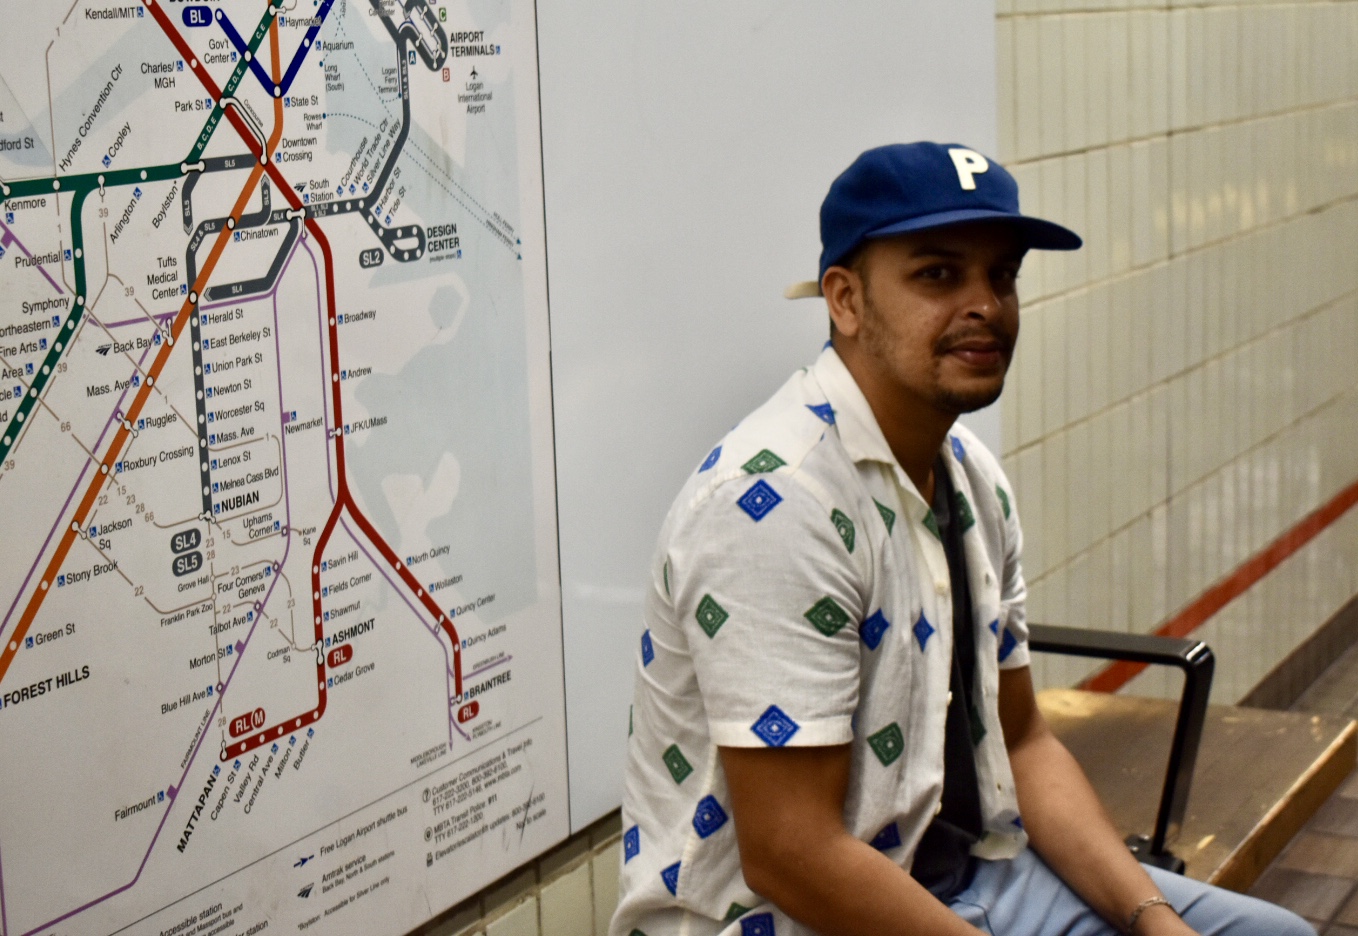 A man in a blue ballcap and white collared shirt sits on a bench in front of an MBTA rapid transit map inside a subway station.